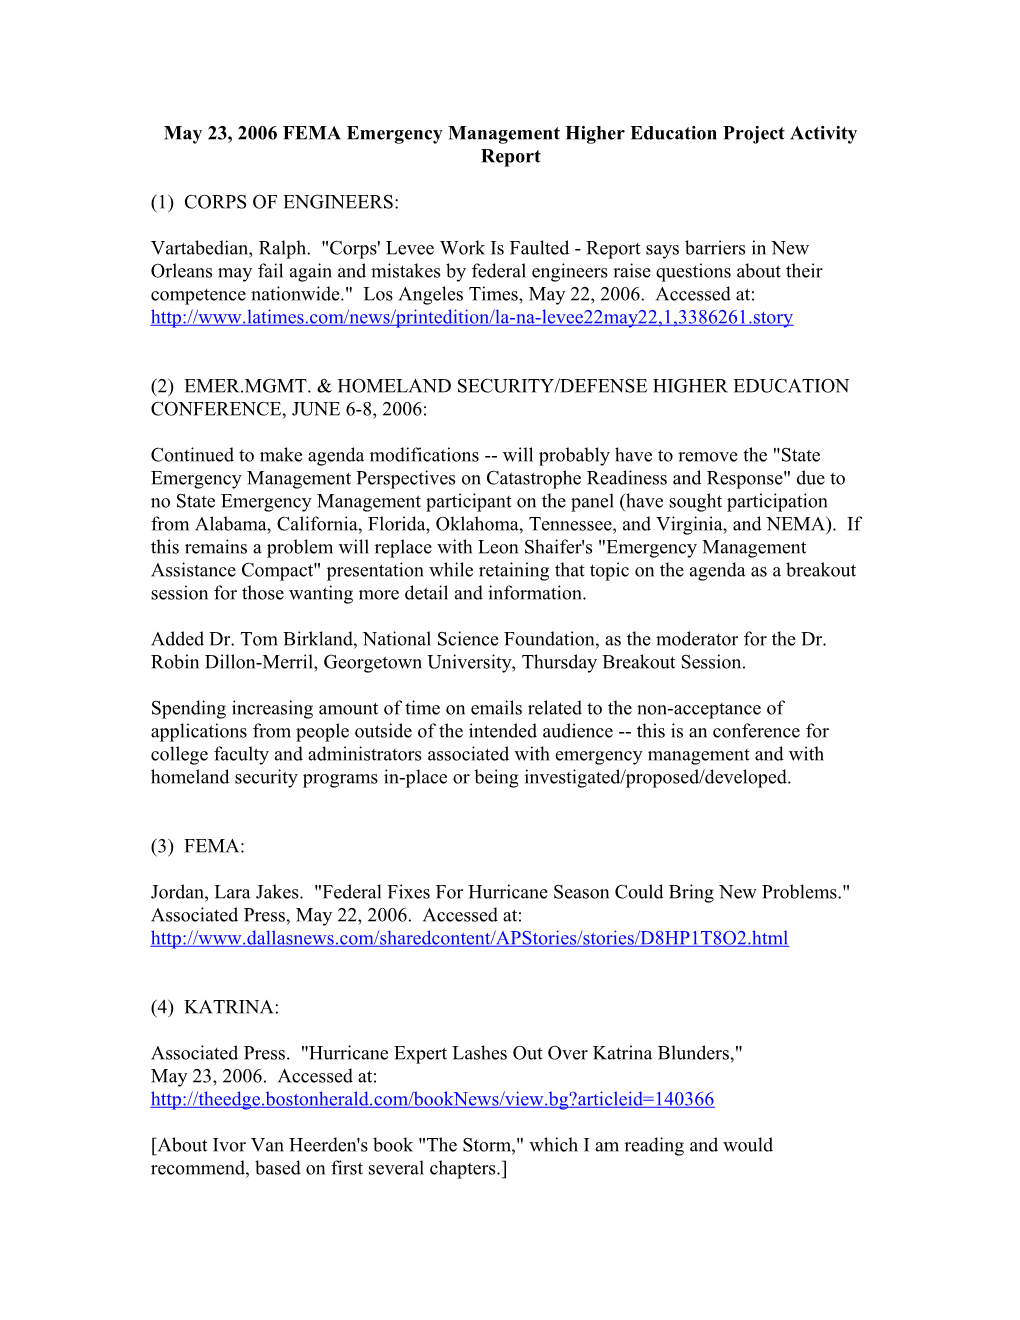 May 23, 2006 FEMA Emergency Management Higher Education Project Activity Report